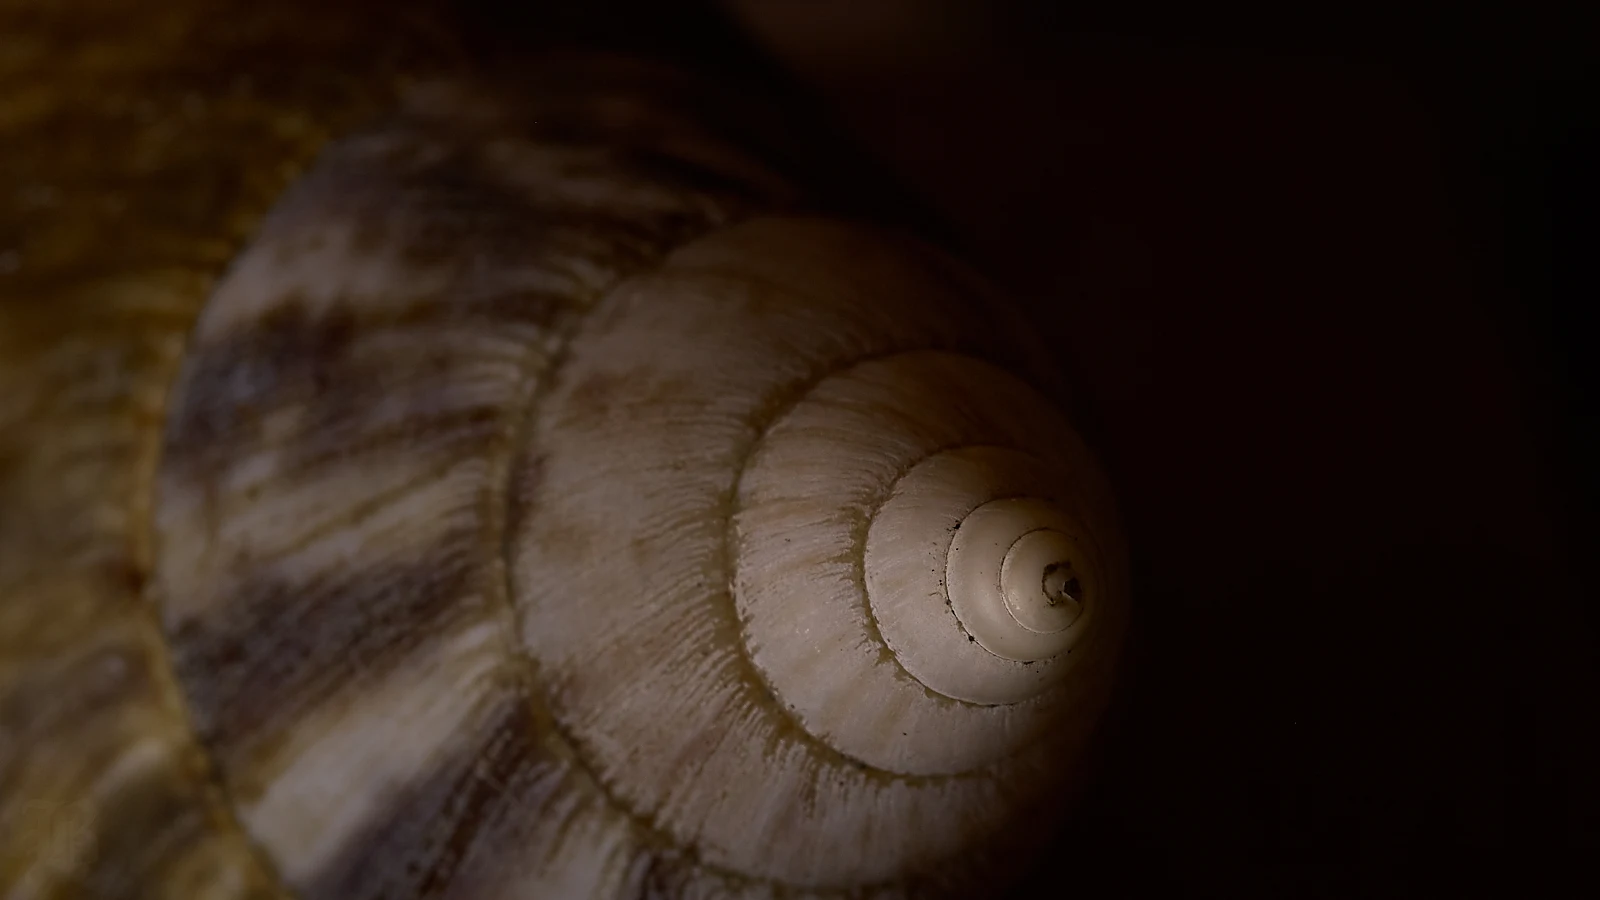 This is a land snail shell not a sea shell. But if you put it to your ear you just might hear the ocean